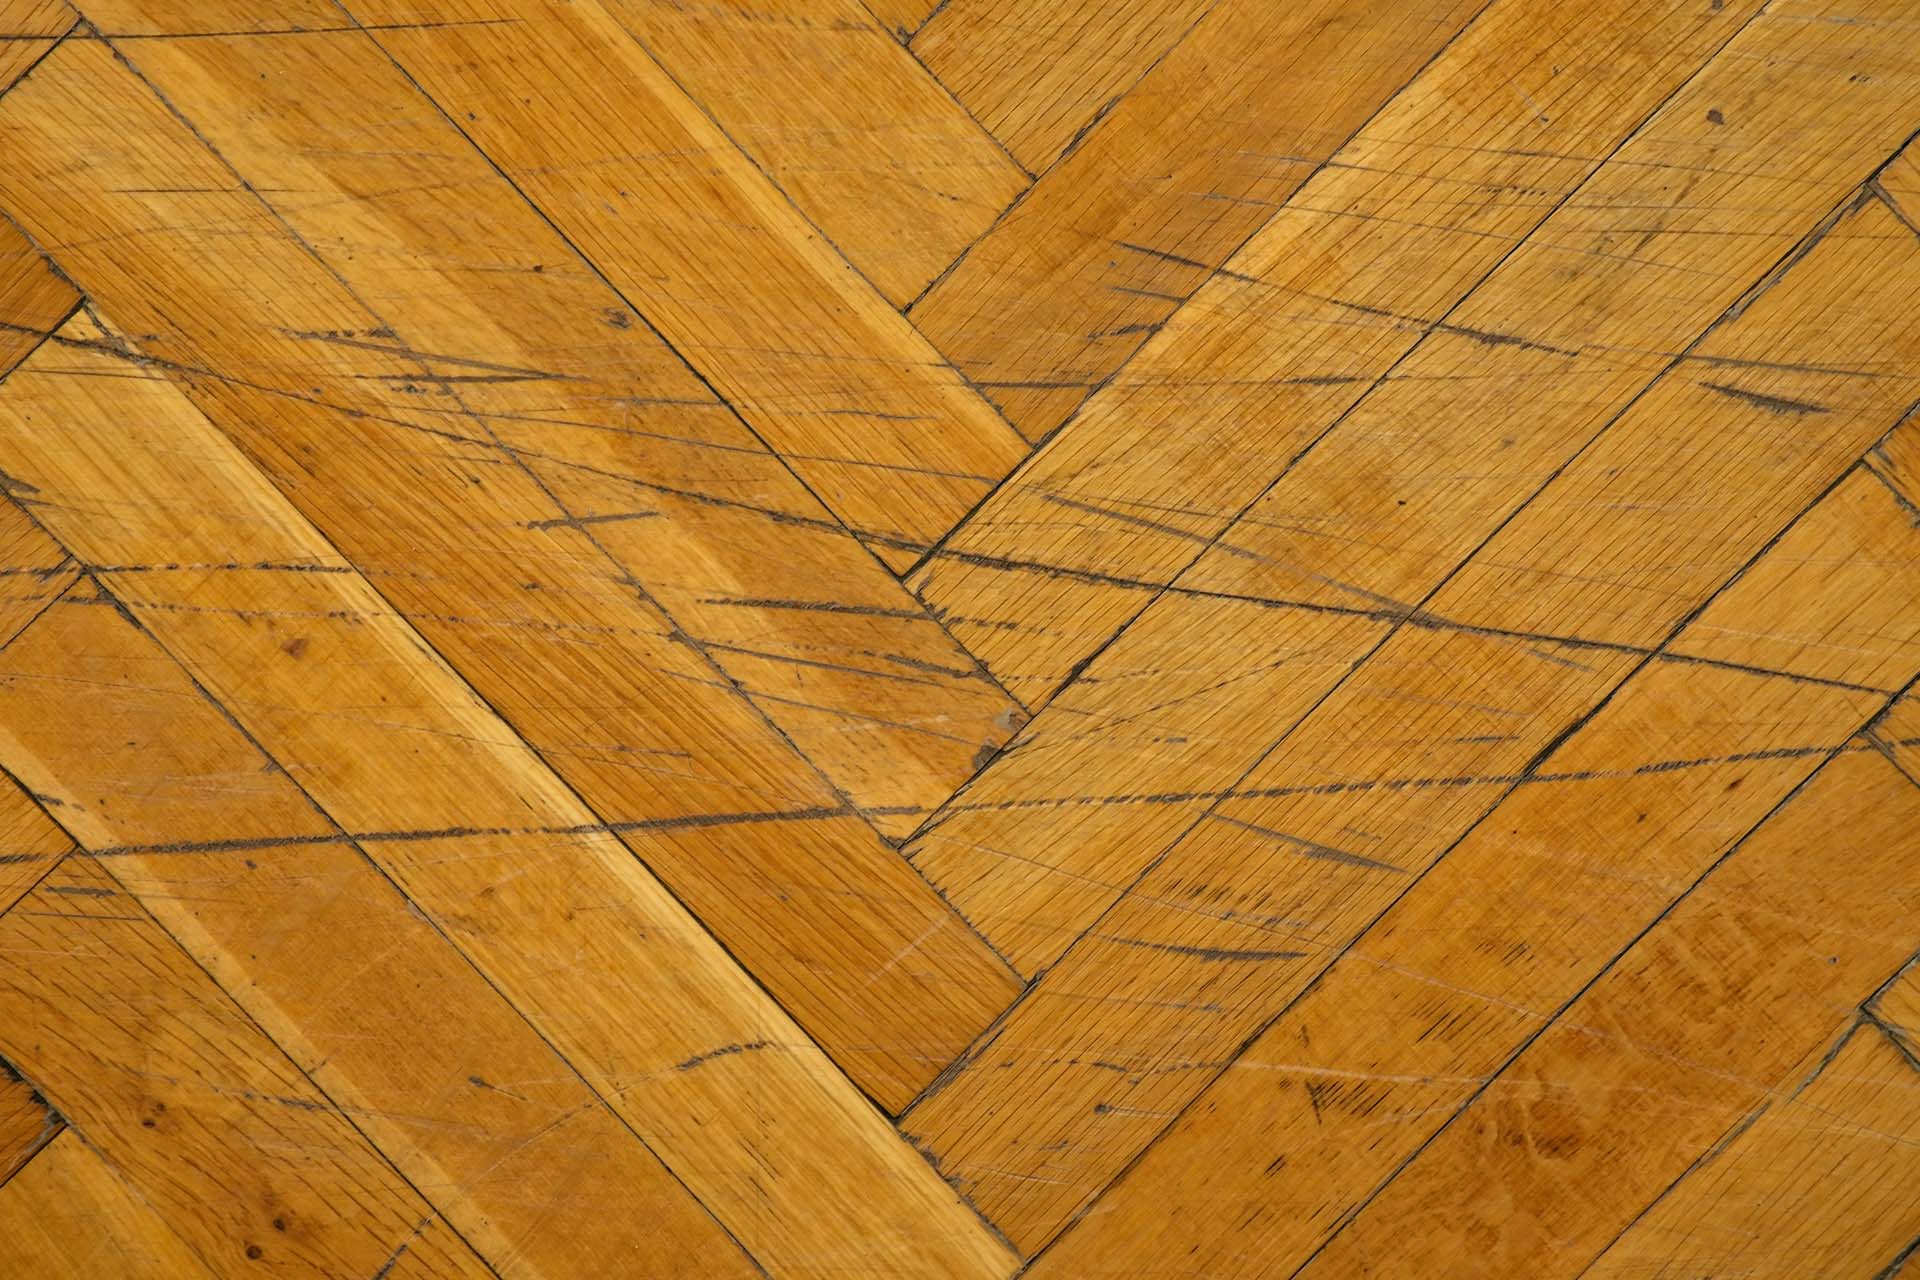 Can A Scratched Wood Floor Be Easily